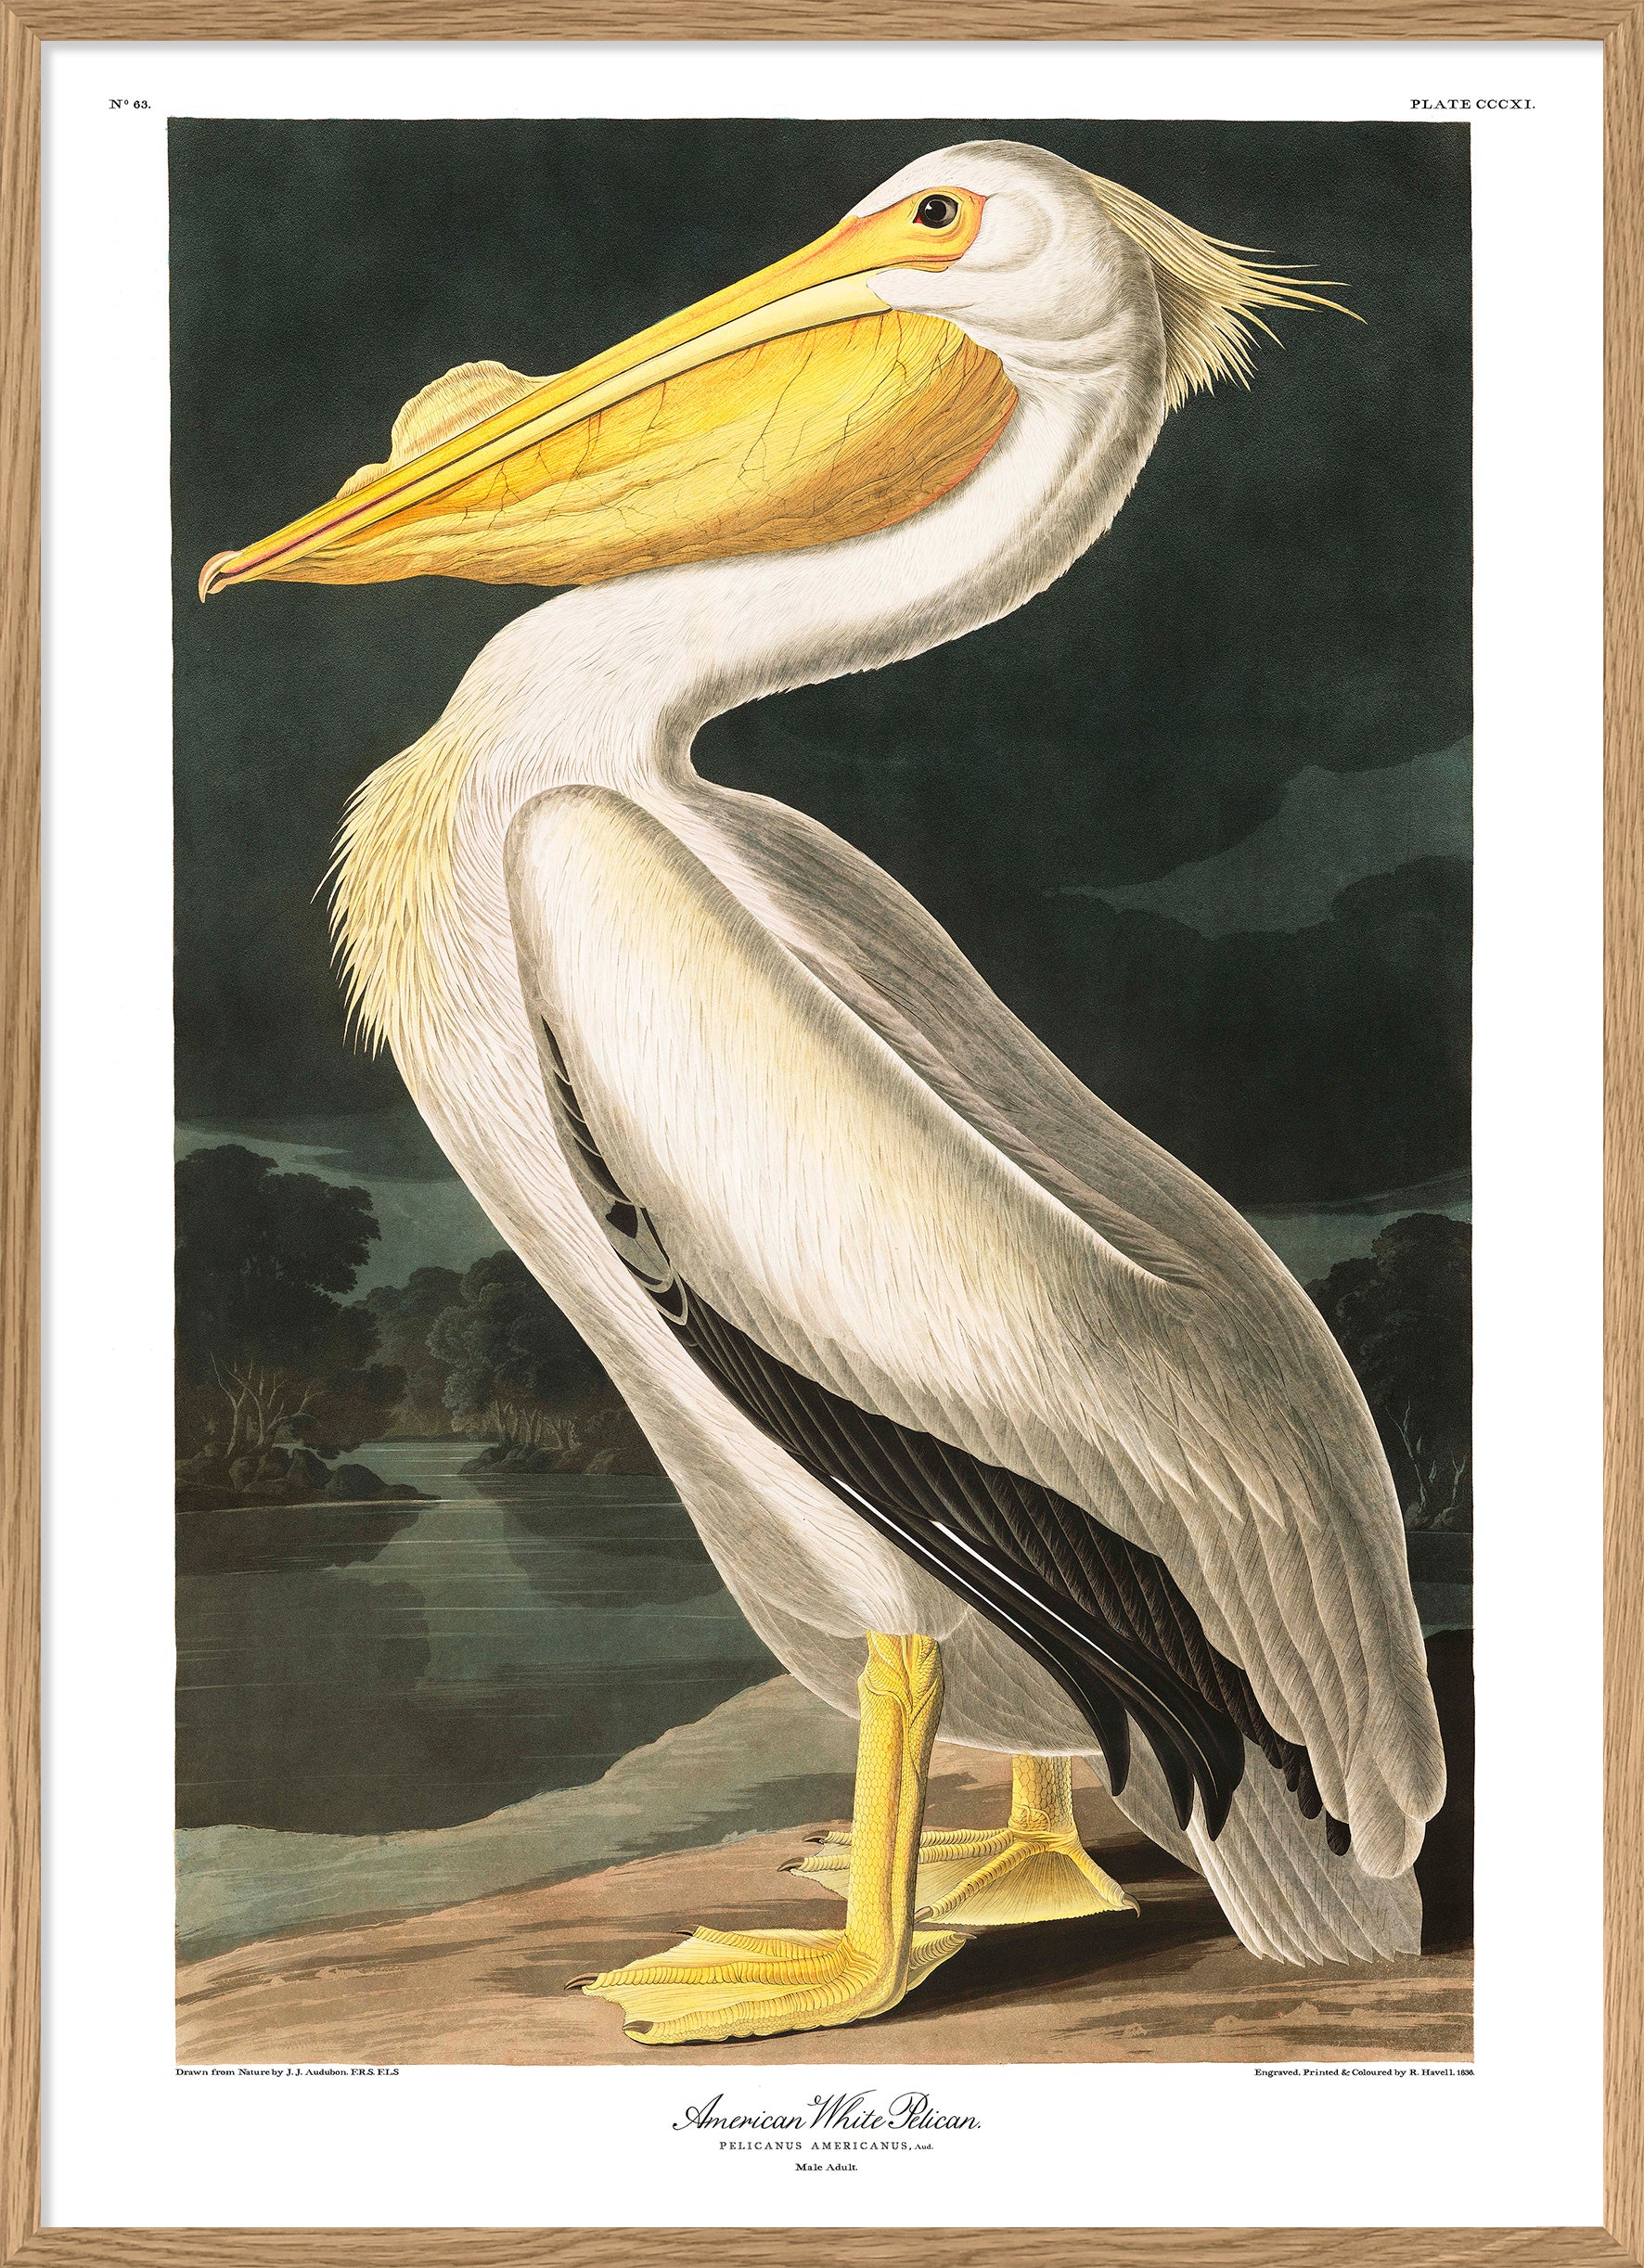 American White Pelican Poster Print 12x16" 28x40" Dybdahl now in Canada